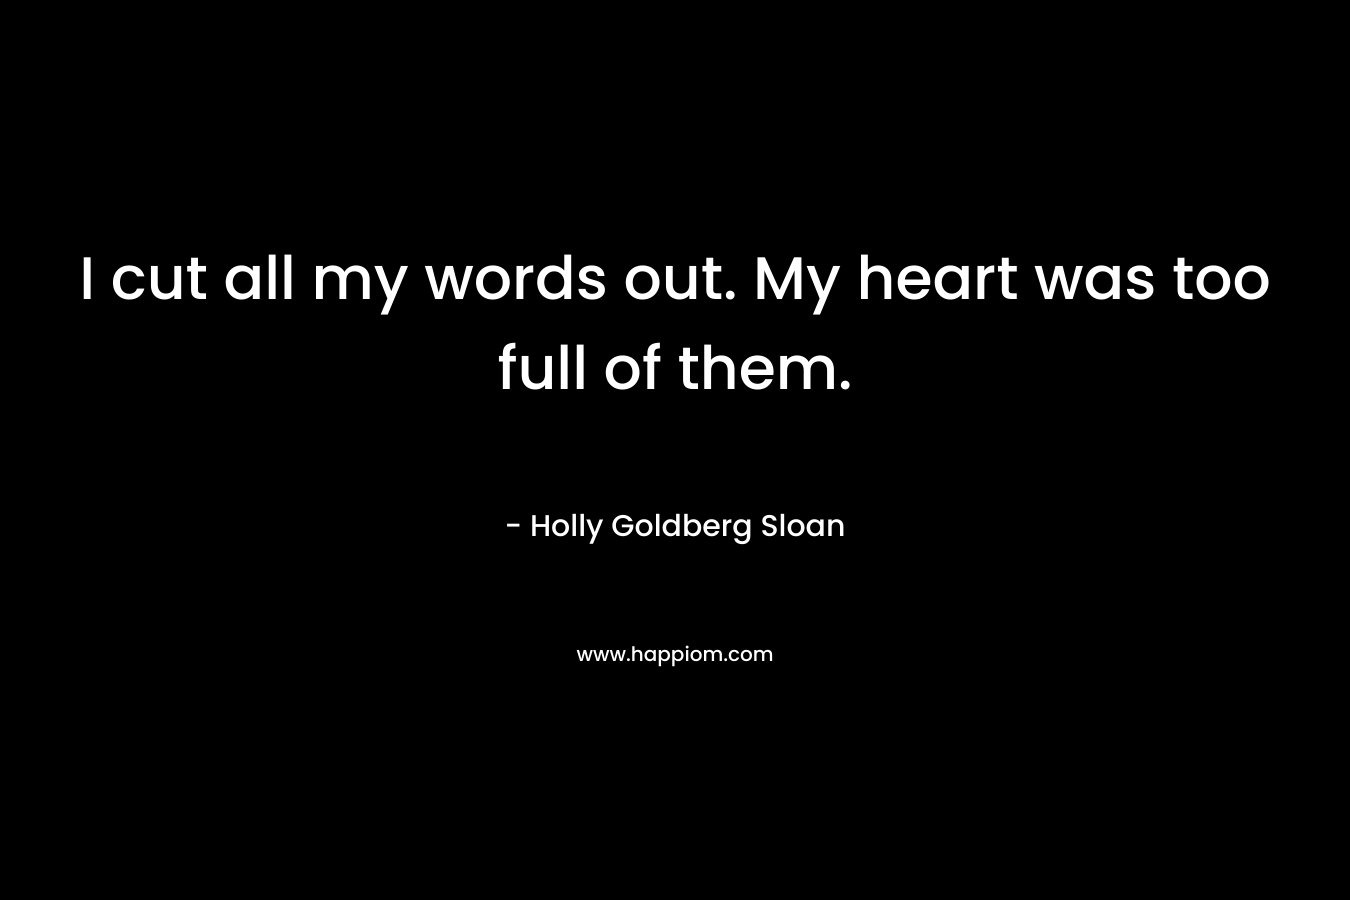 I cut all my words out. My heart was too full of them. – Holly Goldberg Sloan